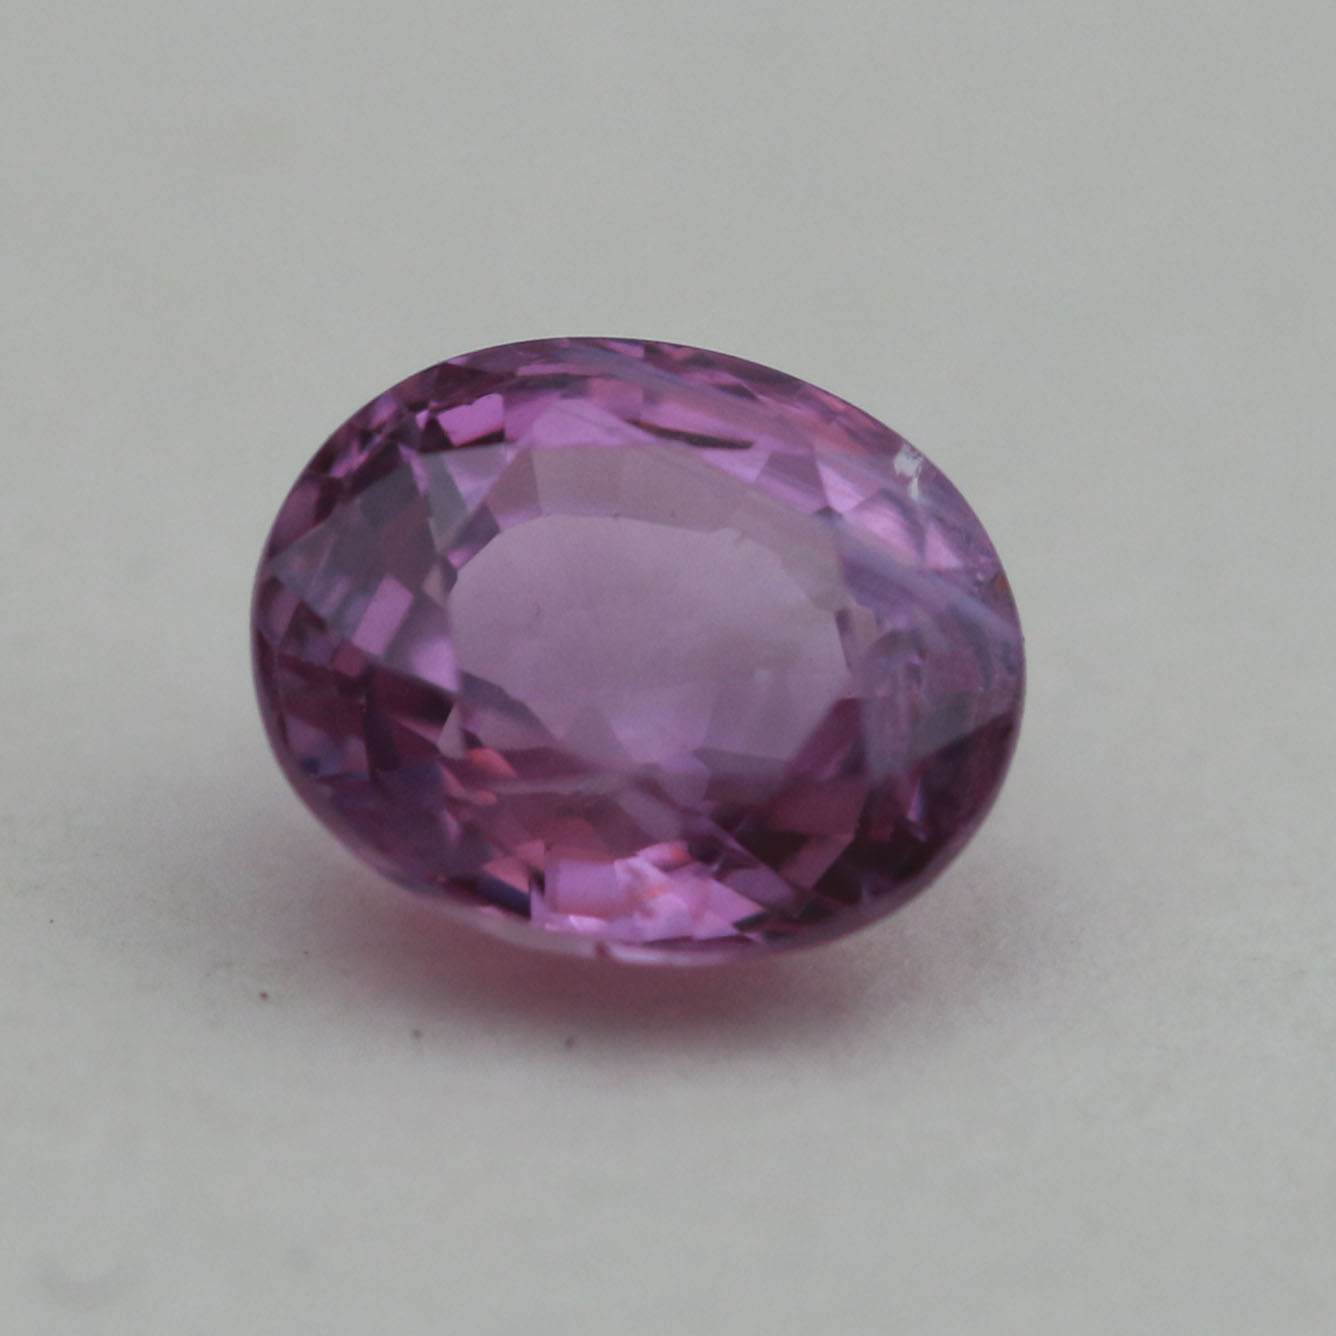 PINK SAPPHIRE 6.2X5.2 OVAL 1.04CT